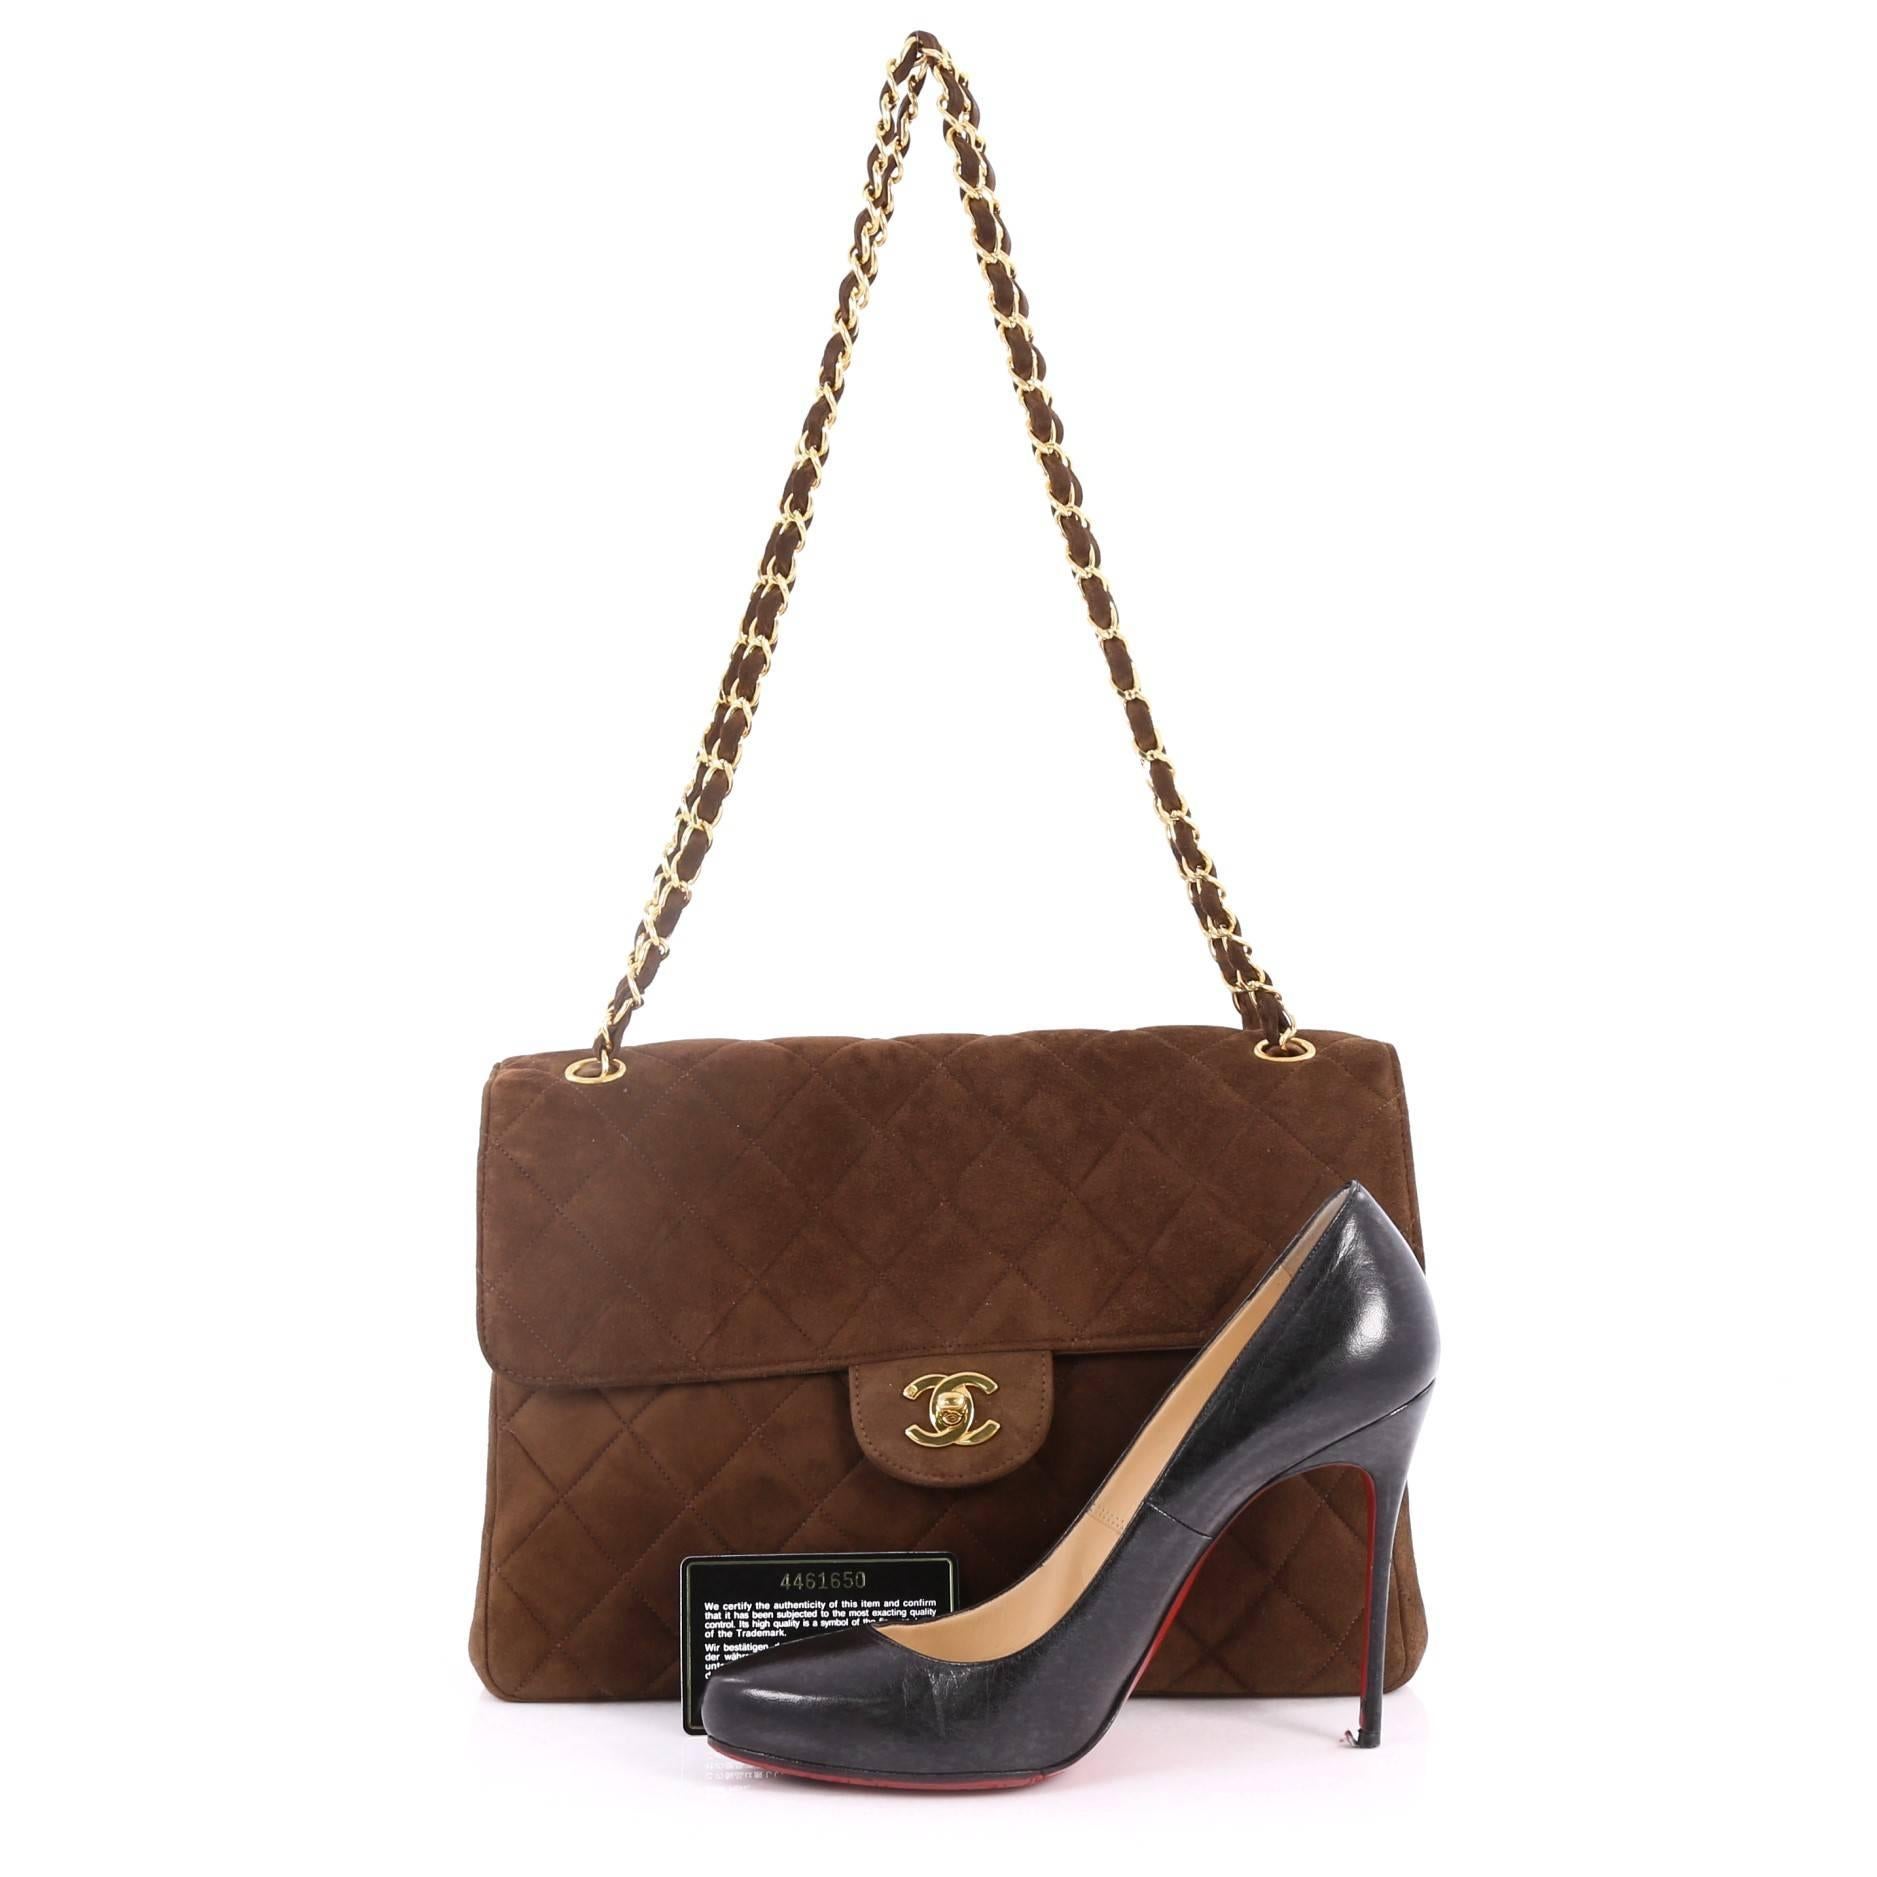 This authentic Chanel Vintage Double Sided Flap Bag Quilted Suede Jumbo showcases an effortlessly elegant style with a unique twist. Crafted in brown diamond quilted suede, this timeless shoulder bag features woven-in leather chain strap, a frontal